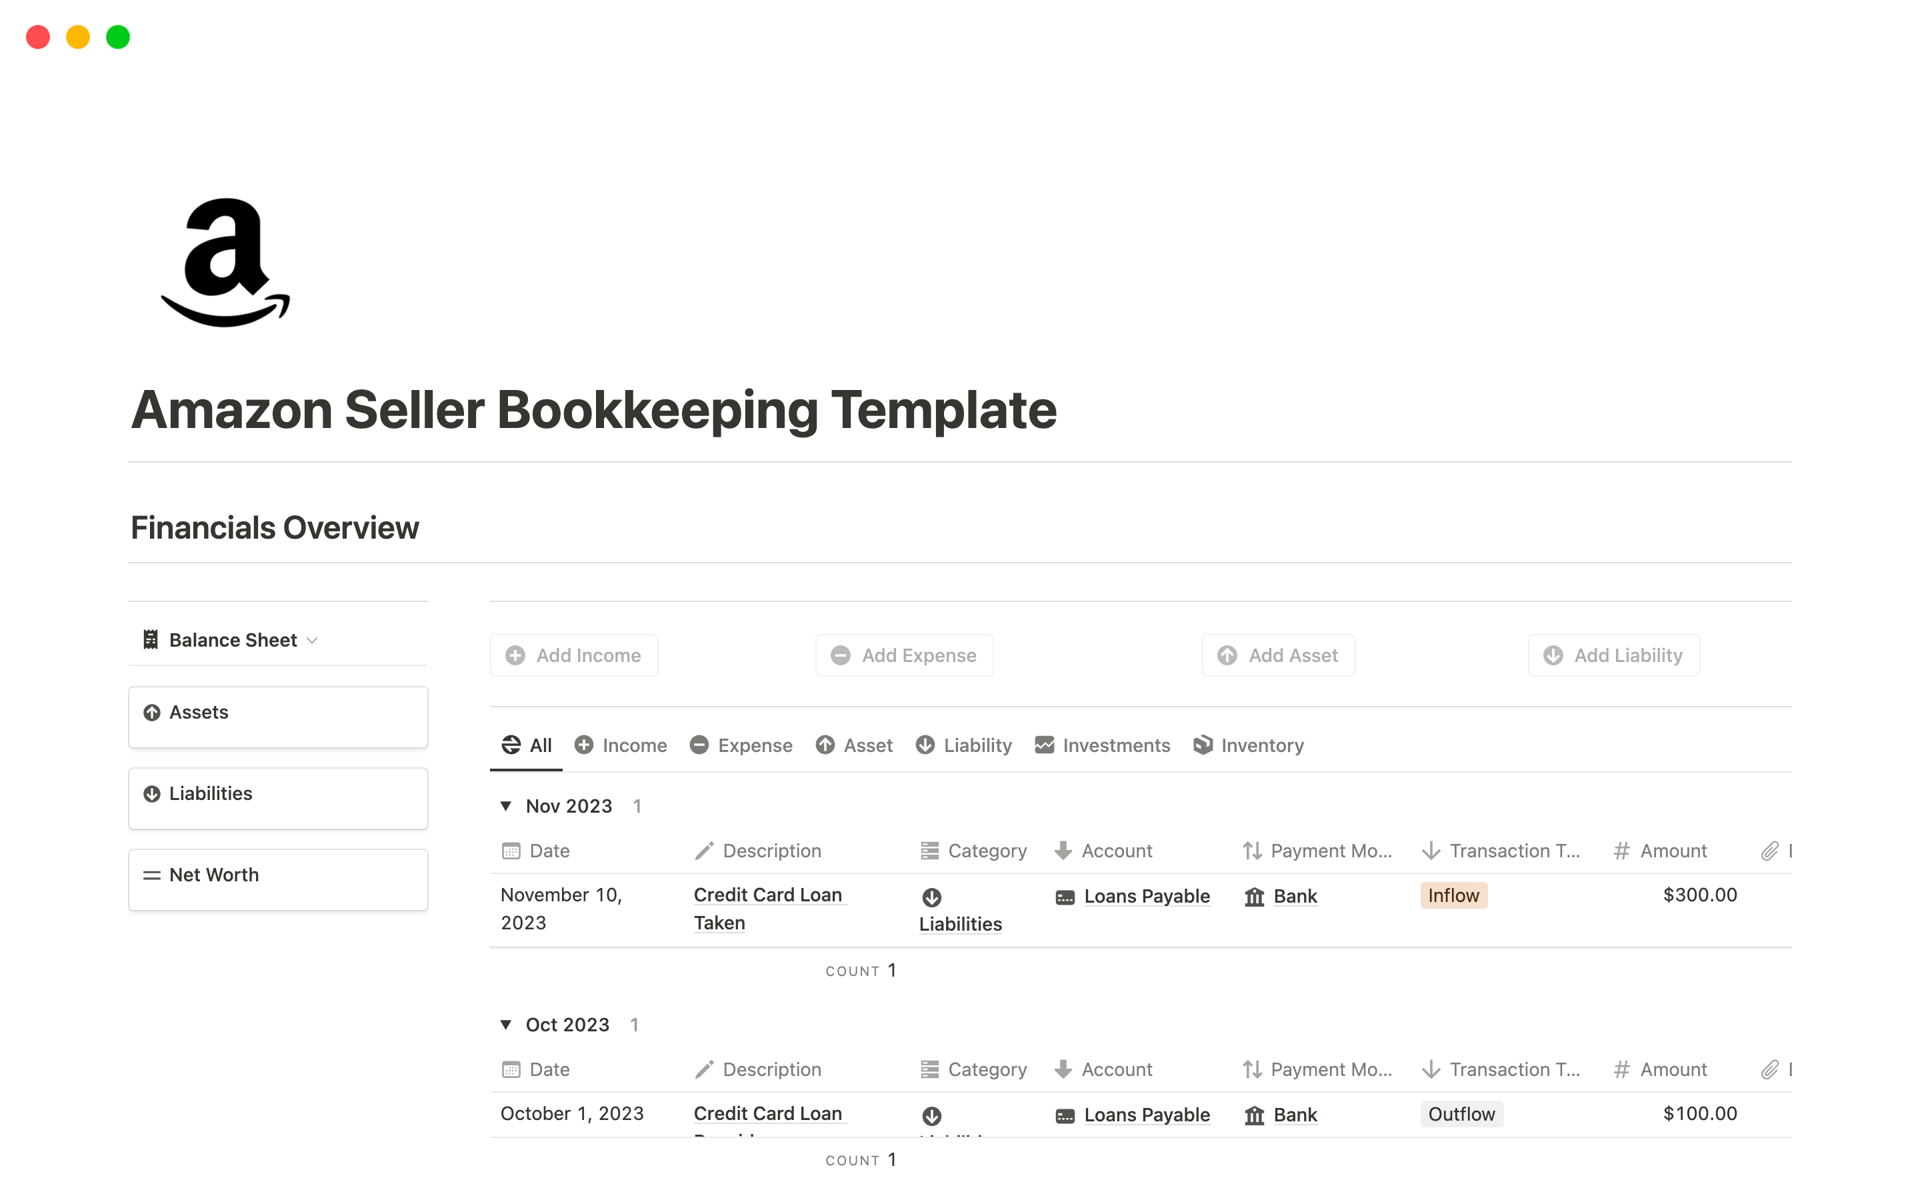 This bookkeeping template provides best solution for amazon sellers to manage their business finances, produce income statement, balance sheet, cash flow statement and much more on a periodical basis.  